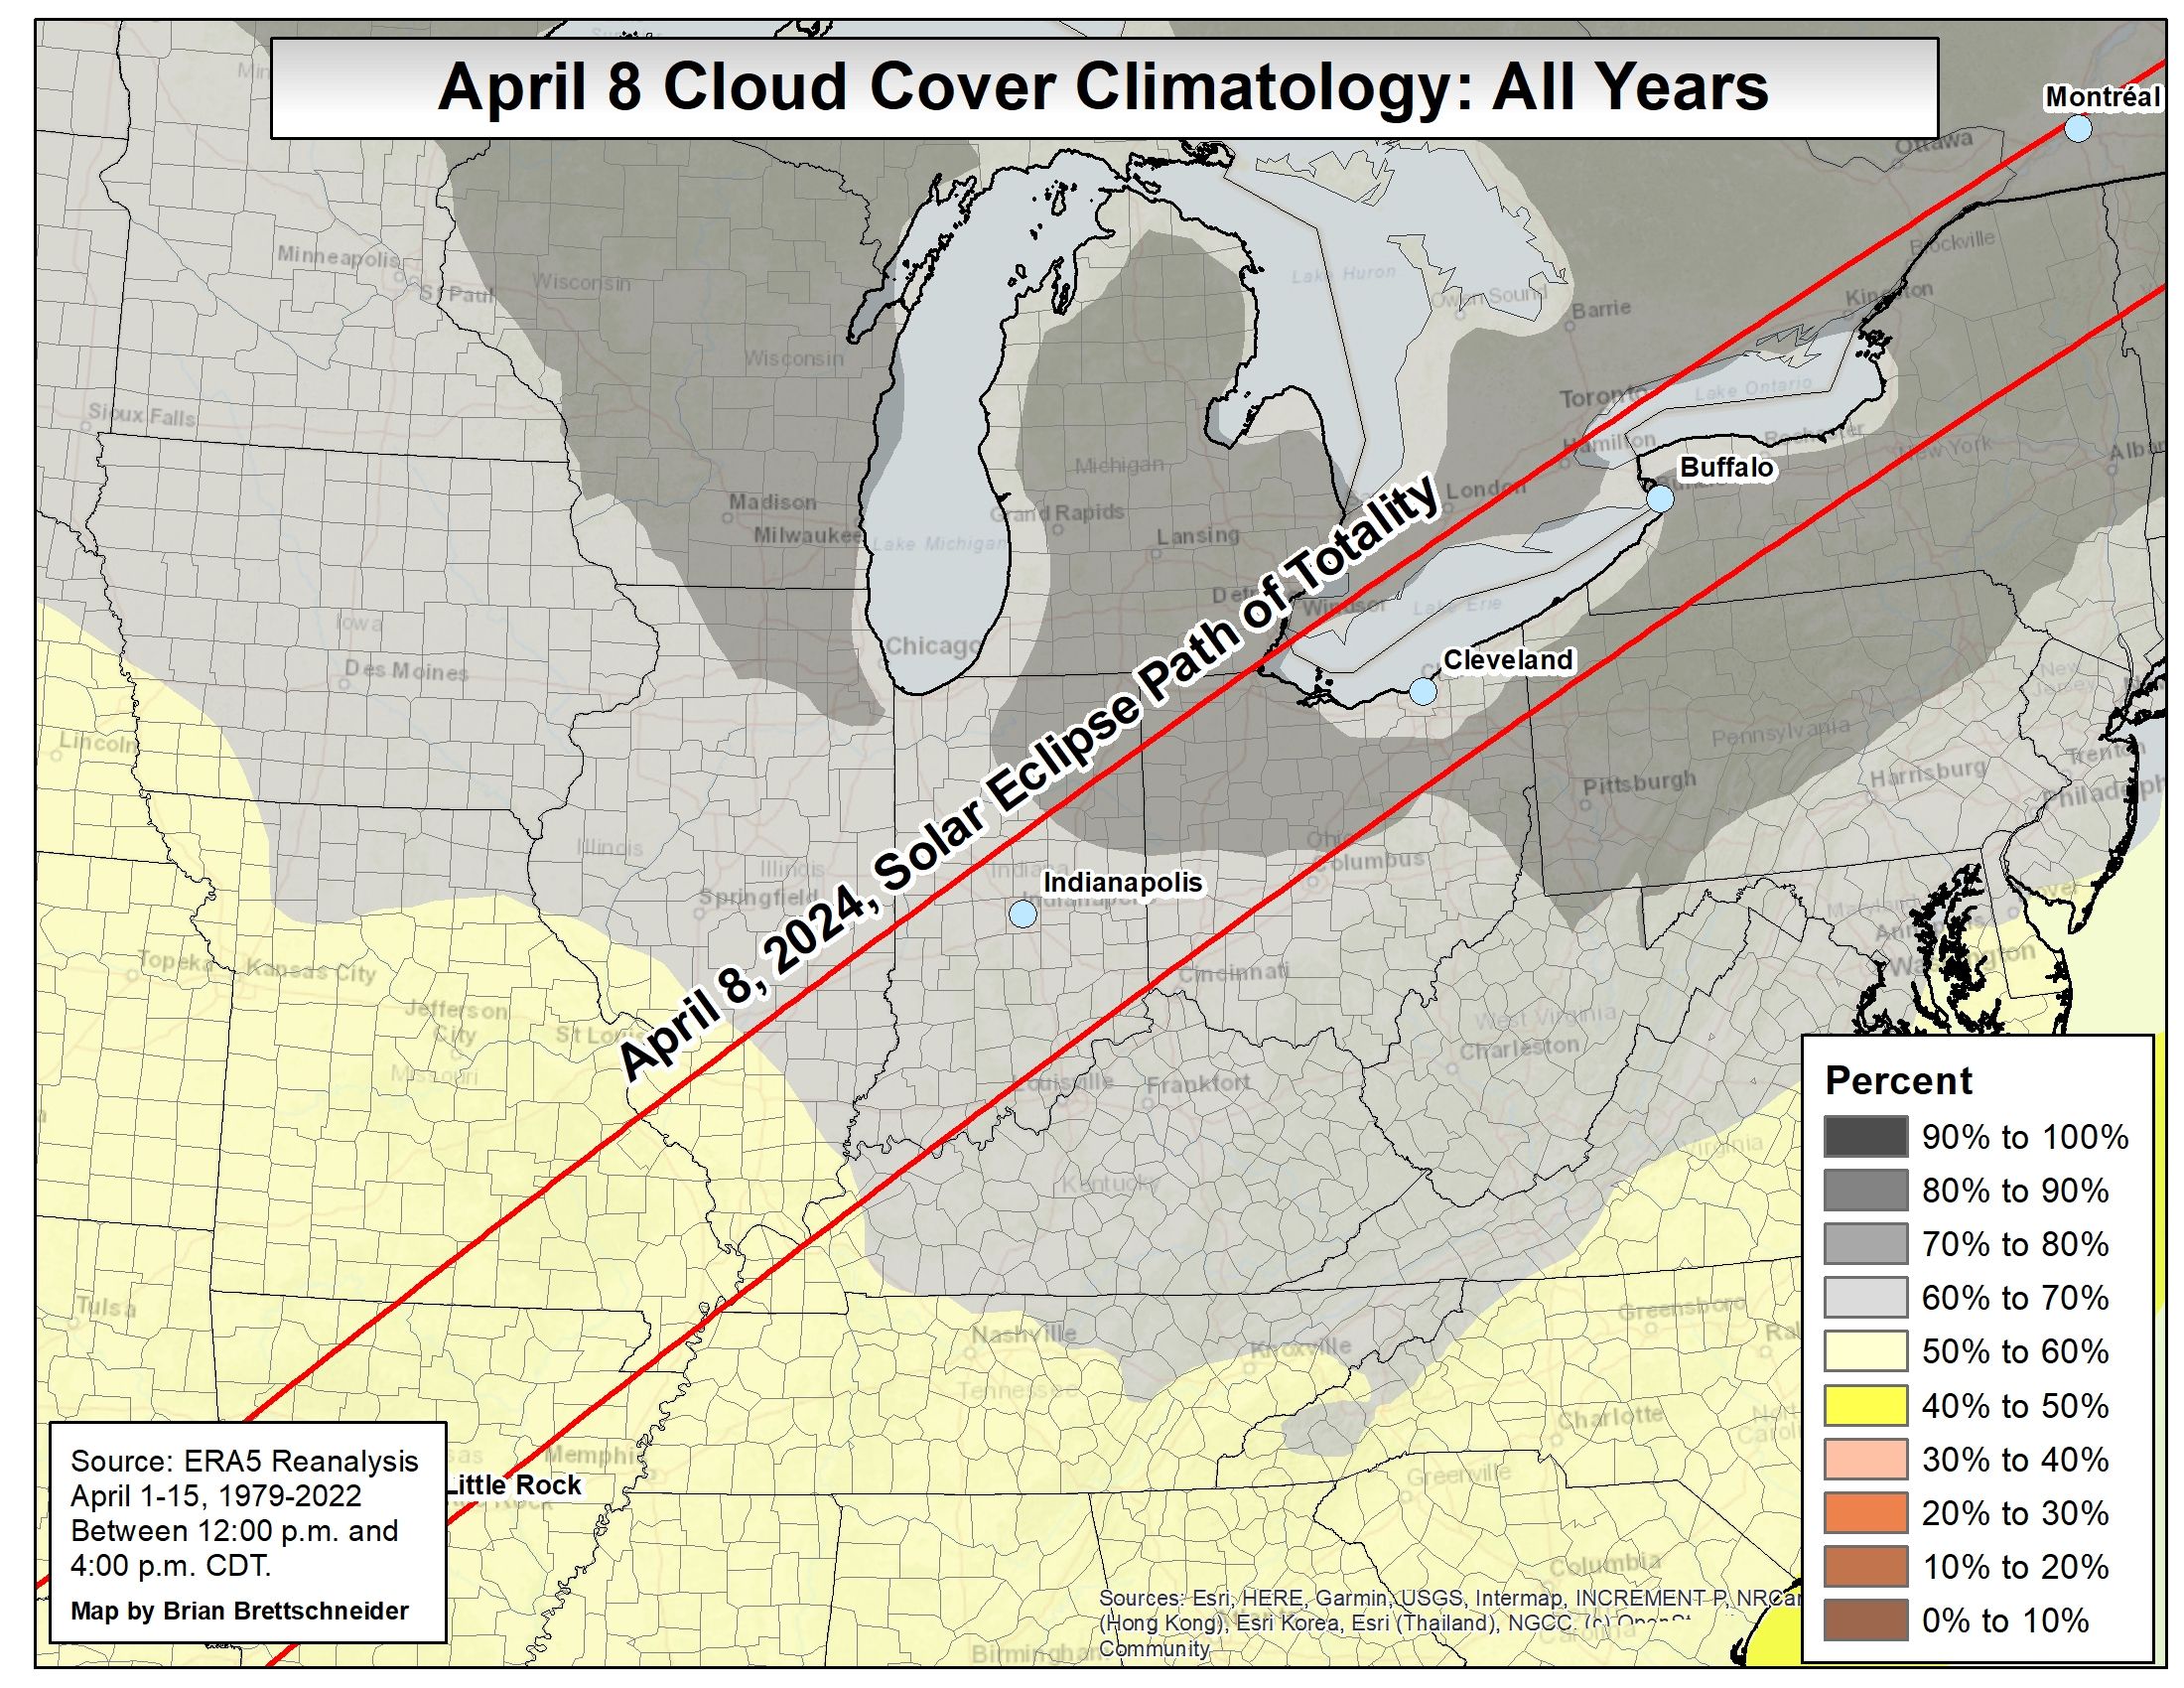 Cloud climatology for all years